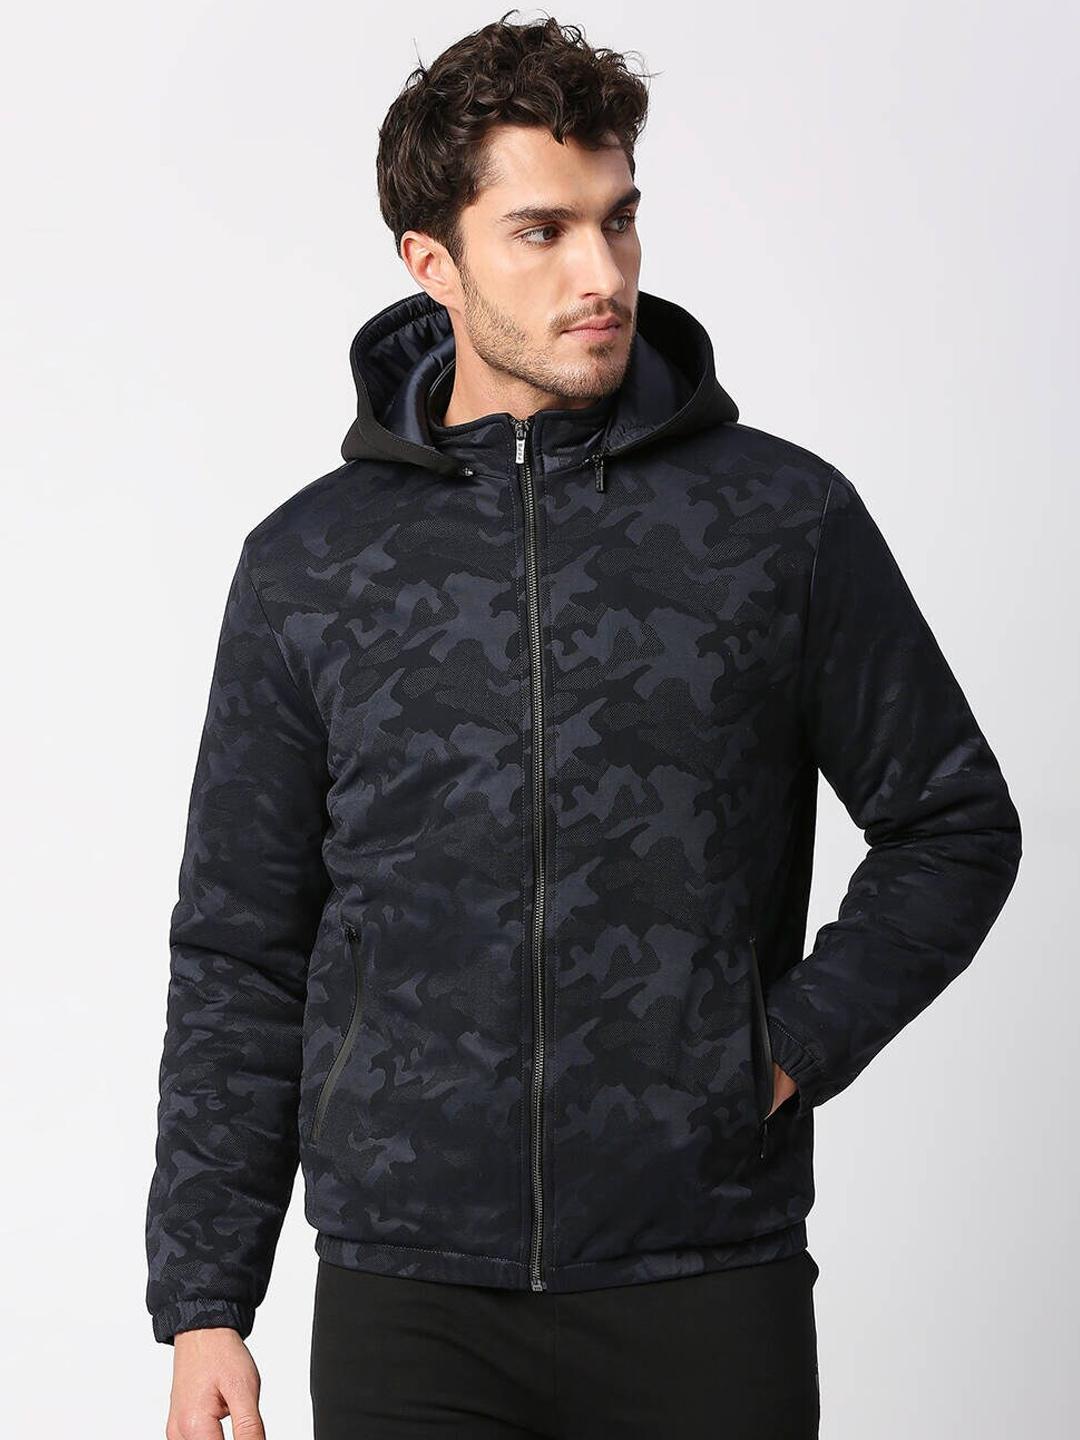 Pepe Jeans Men Camouflage Sporty Jacket